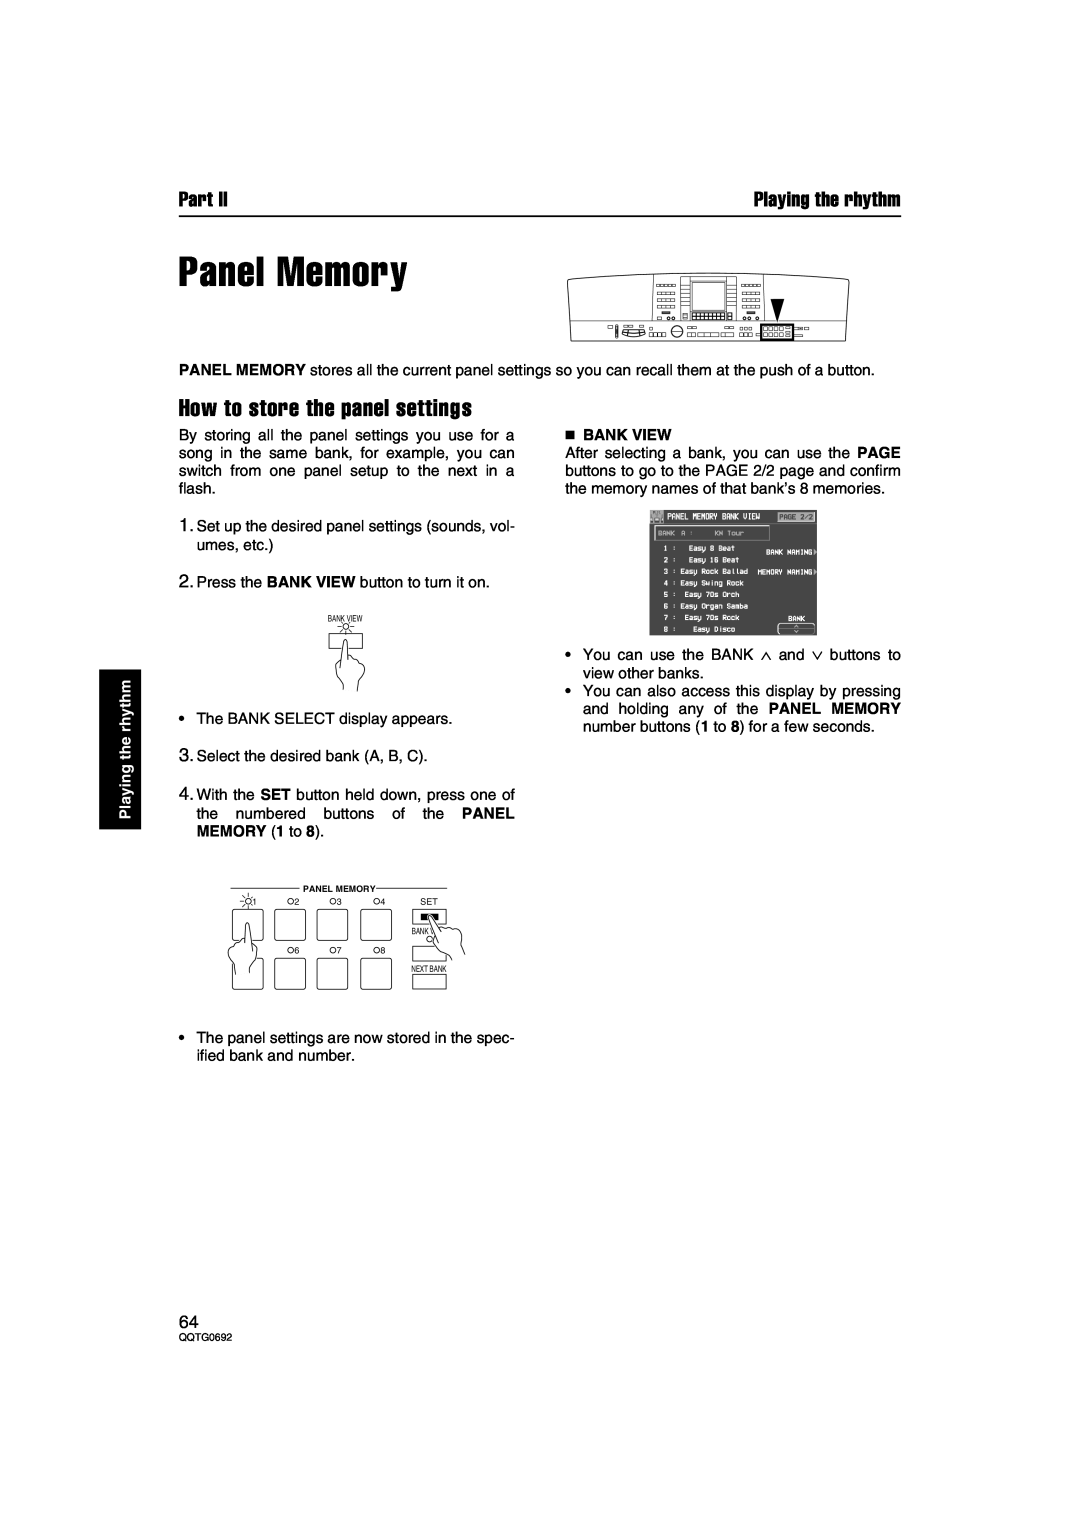 Panasonic SX-KN2600, SX-KN2400 manual Panel Memory, How to store the panel settings, Bank View, Part, Playing the rhythm 